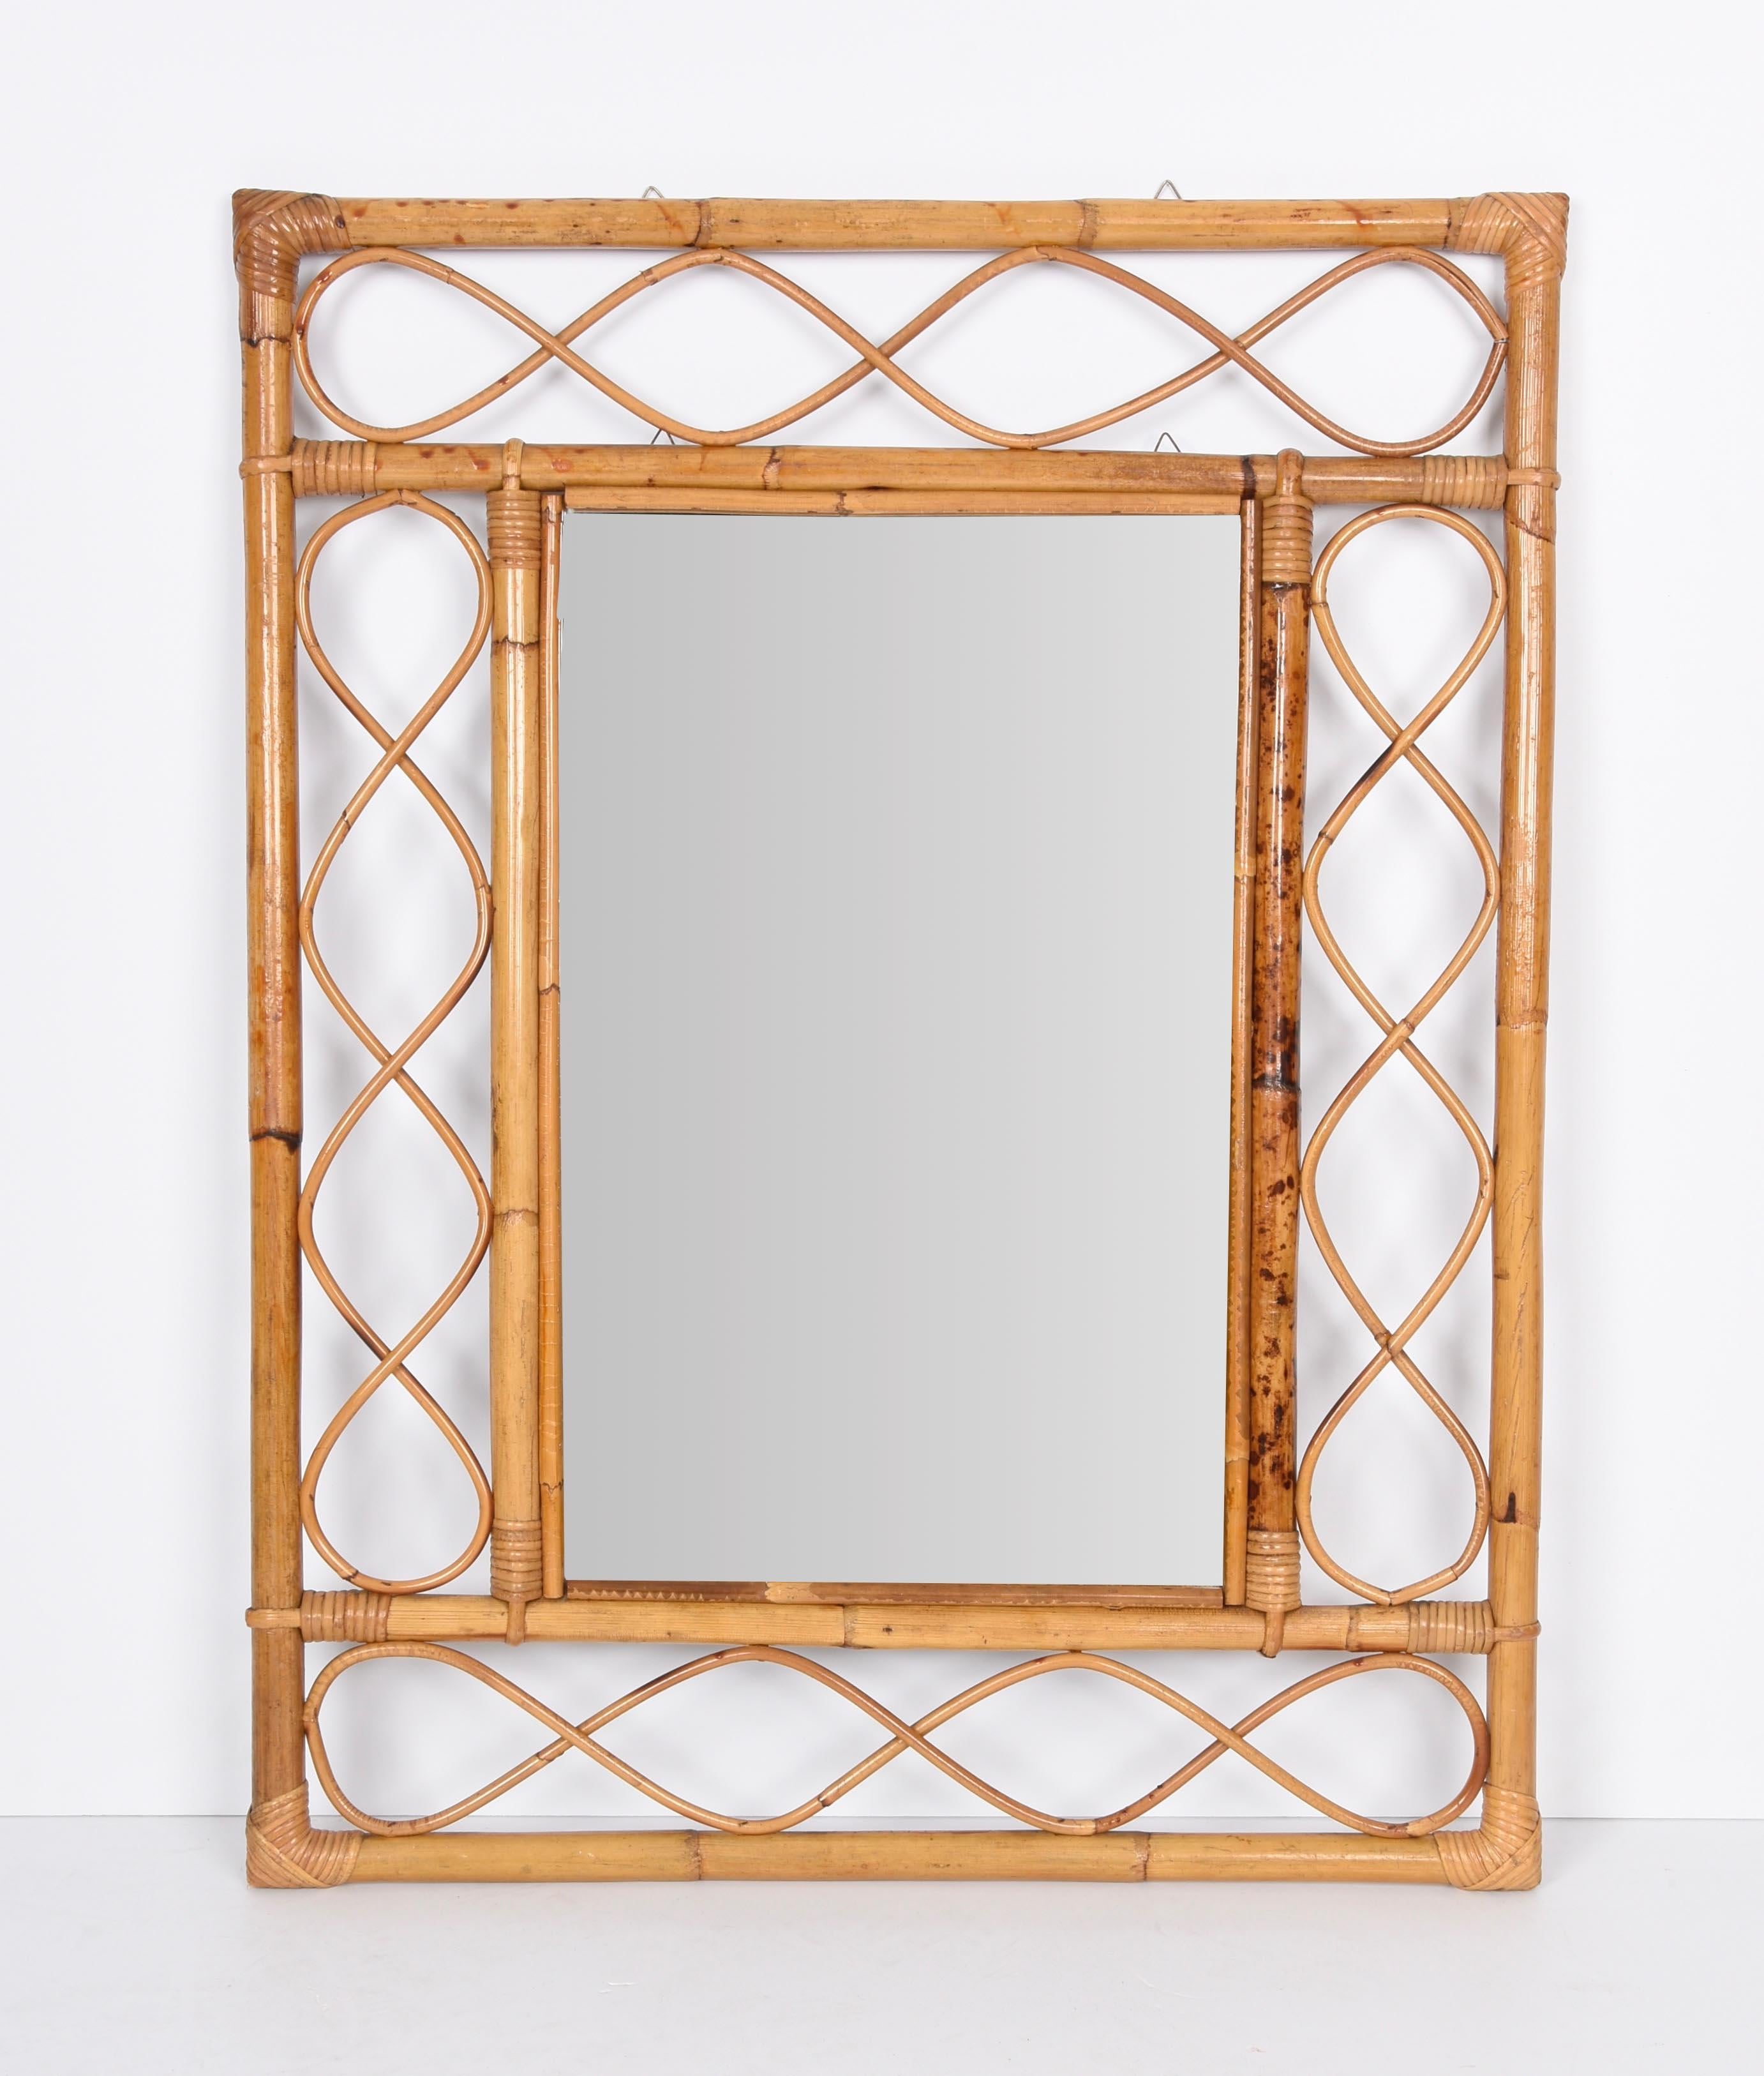 Mid-20th Century Midcentury French Riviera Bamboo and Rattan Rectangular Wall Mirror France 1960s